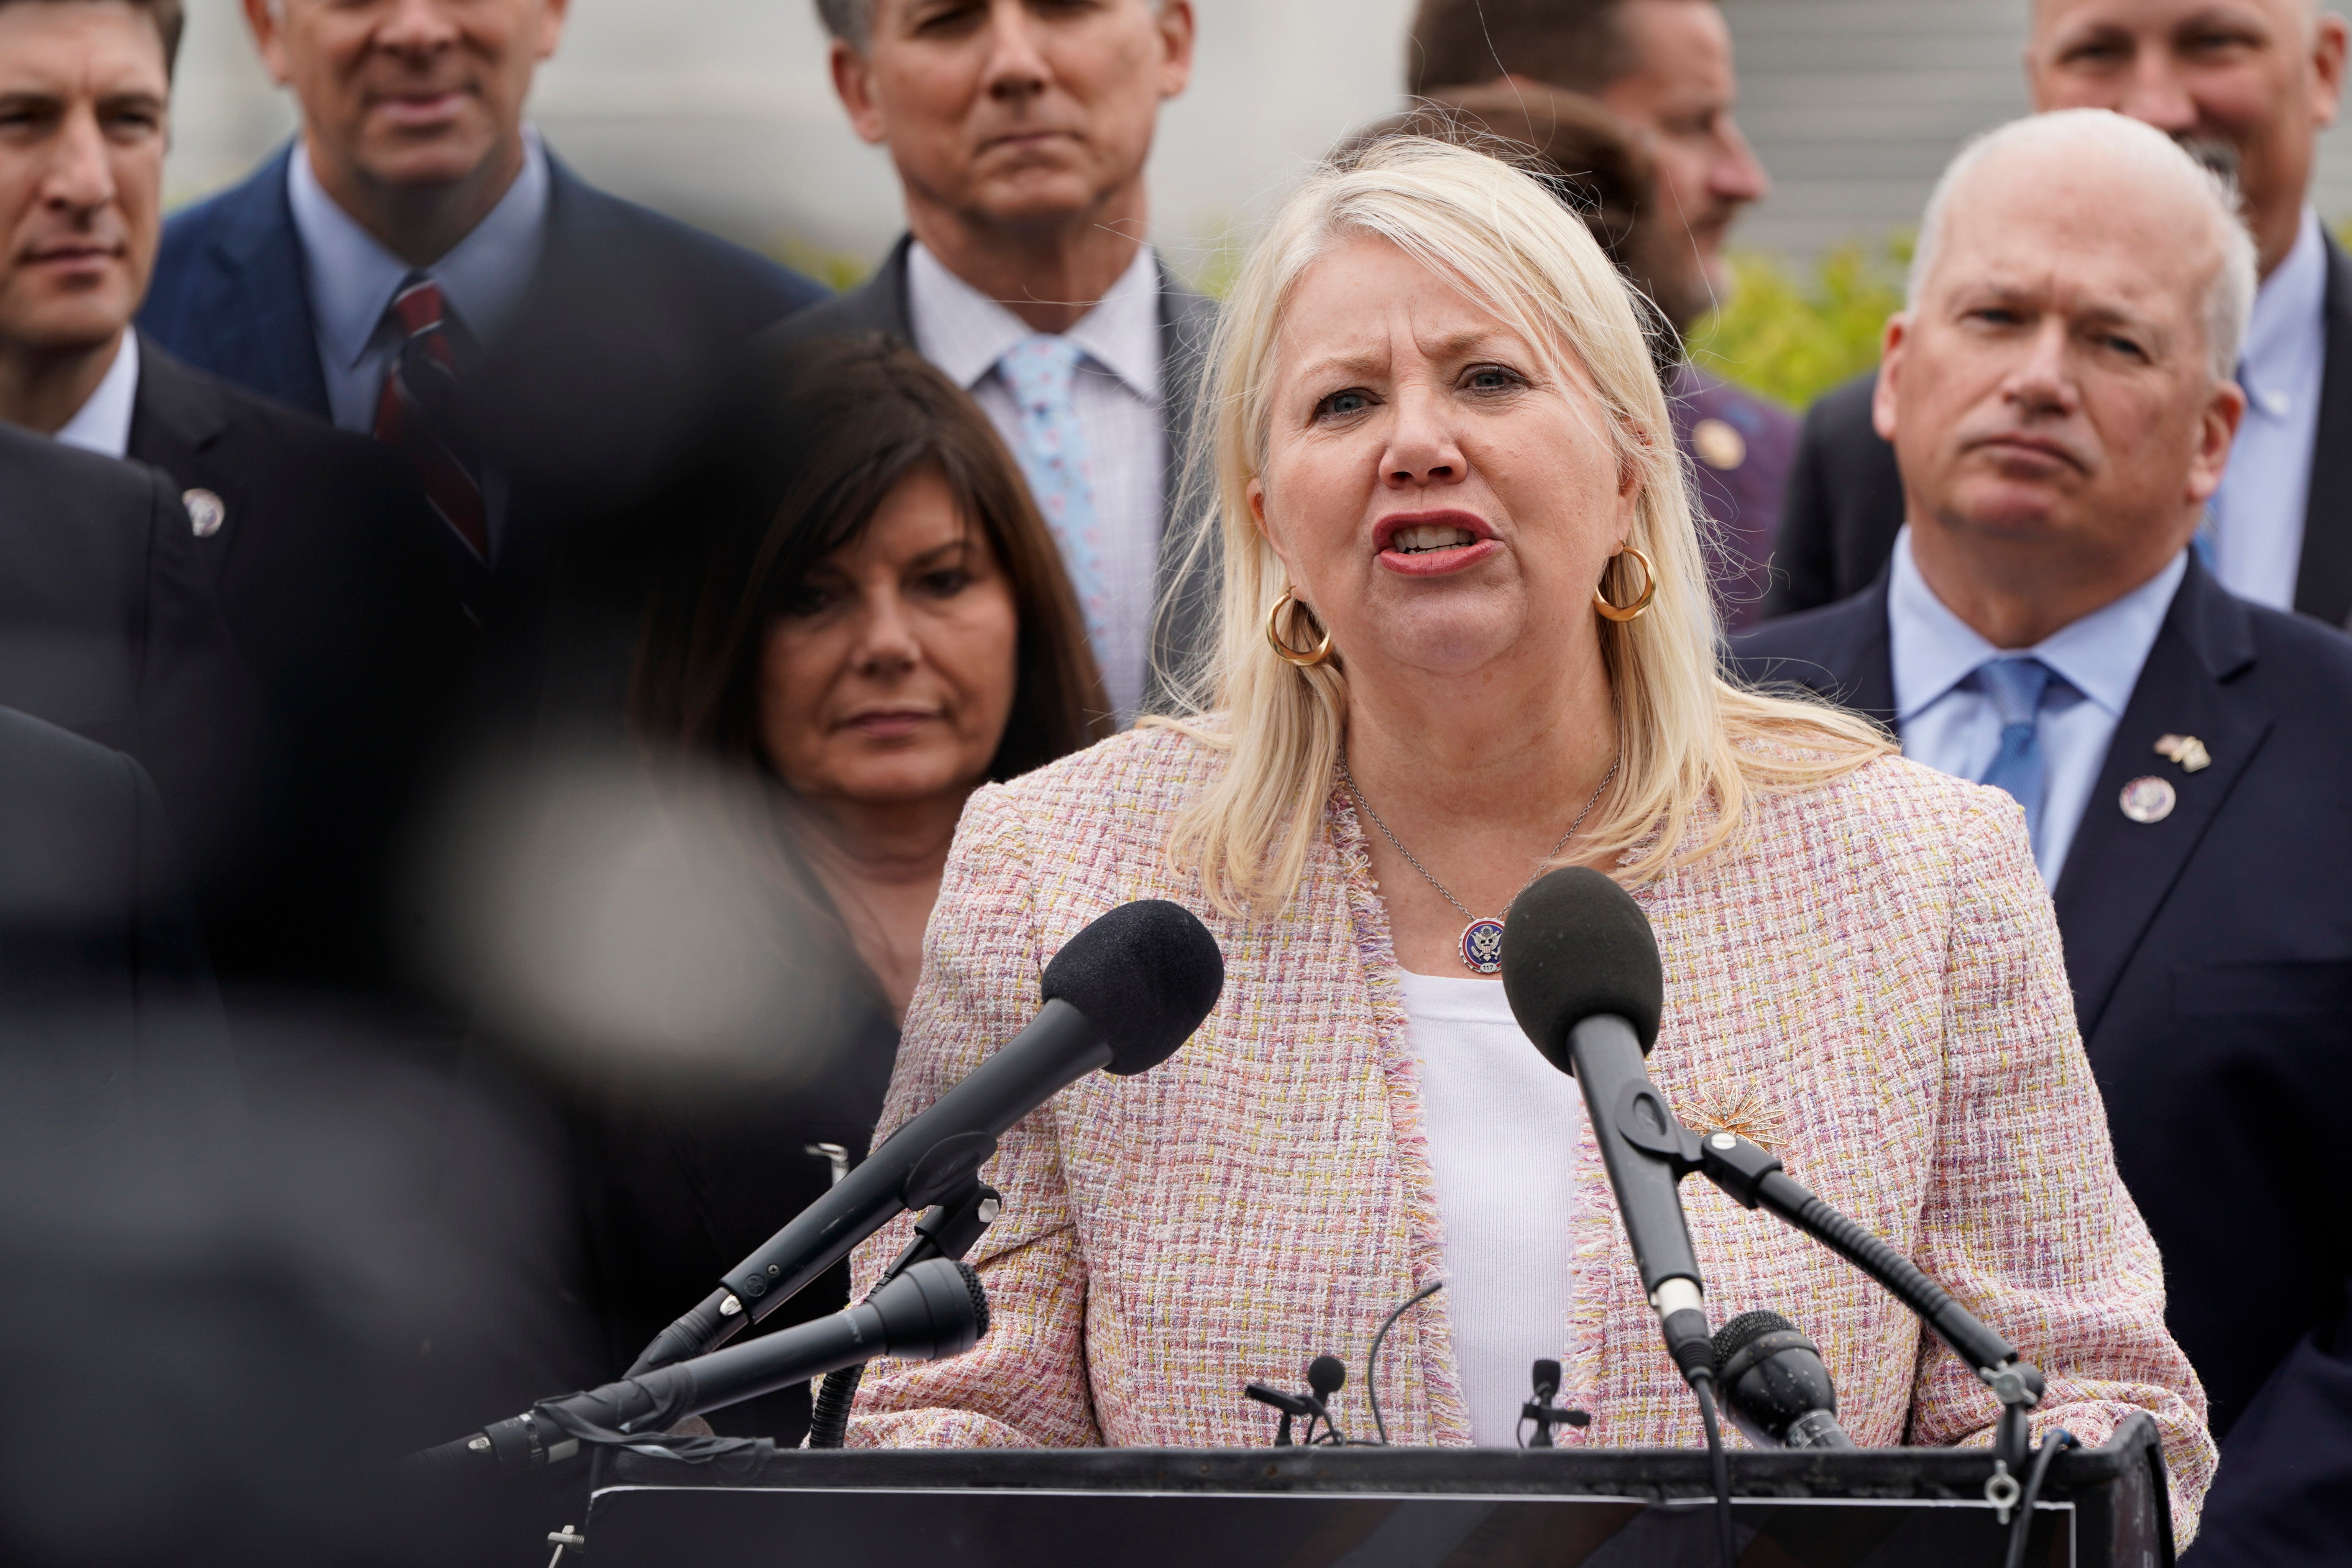 Rep Debbie Lesko says over one billion people have been apprehended at the US-Mexico border in six months